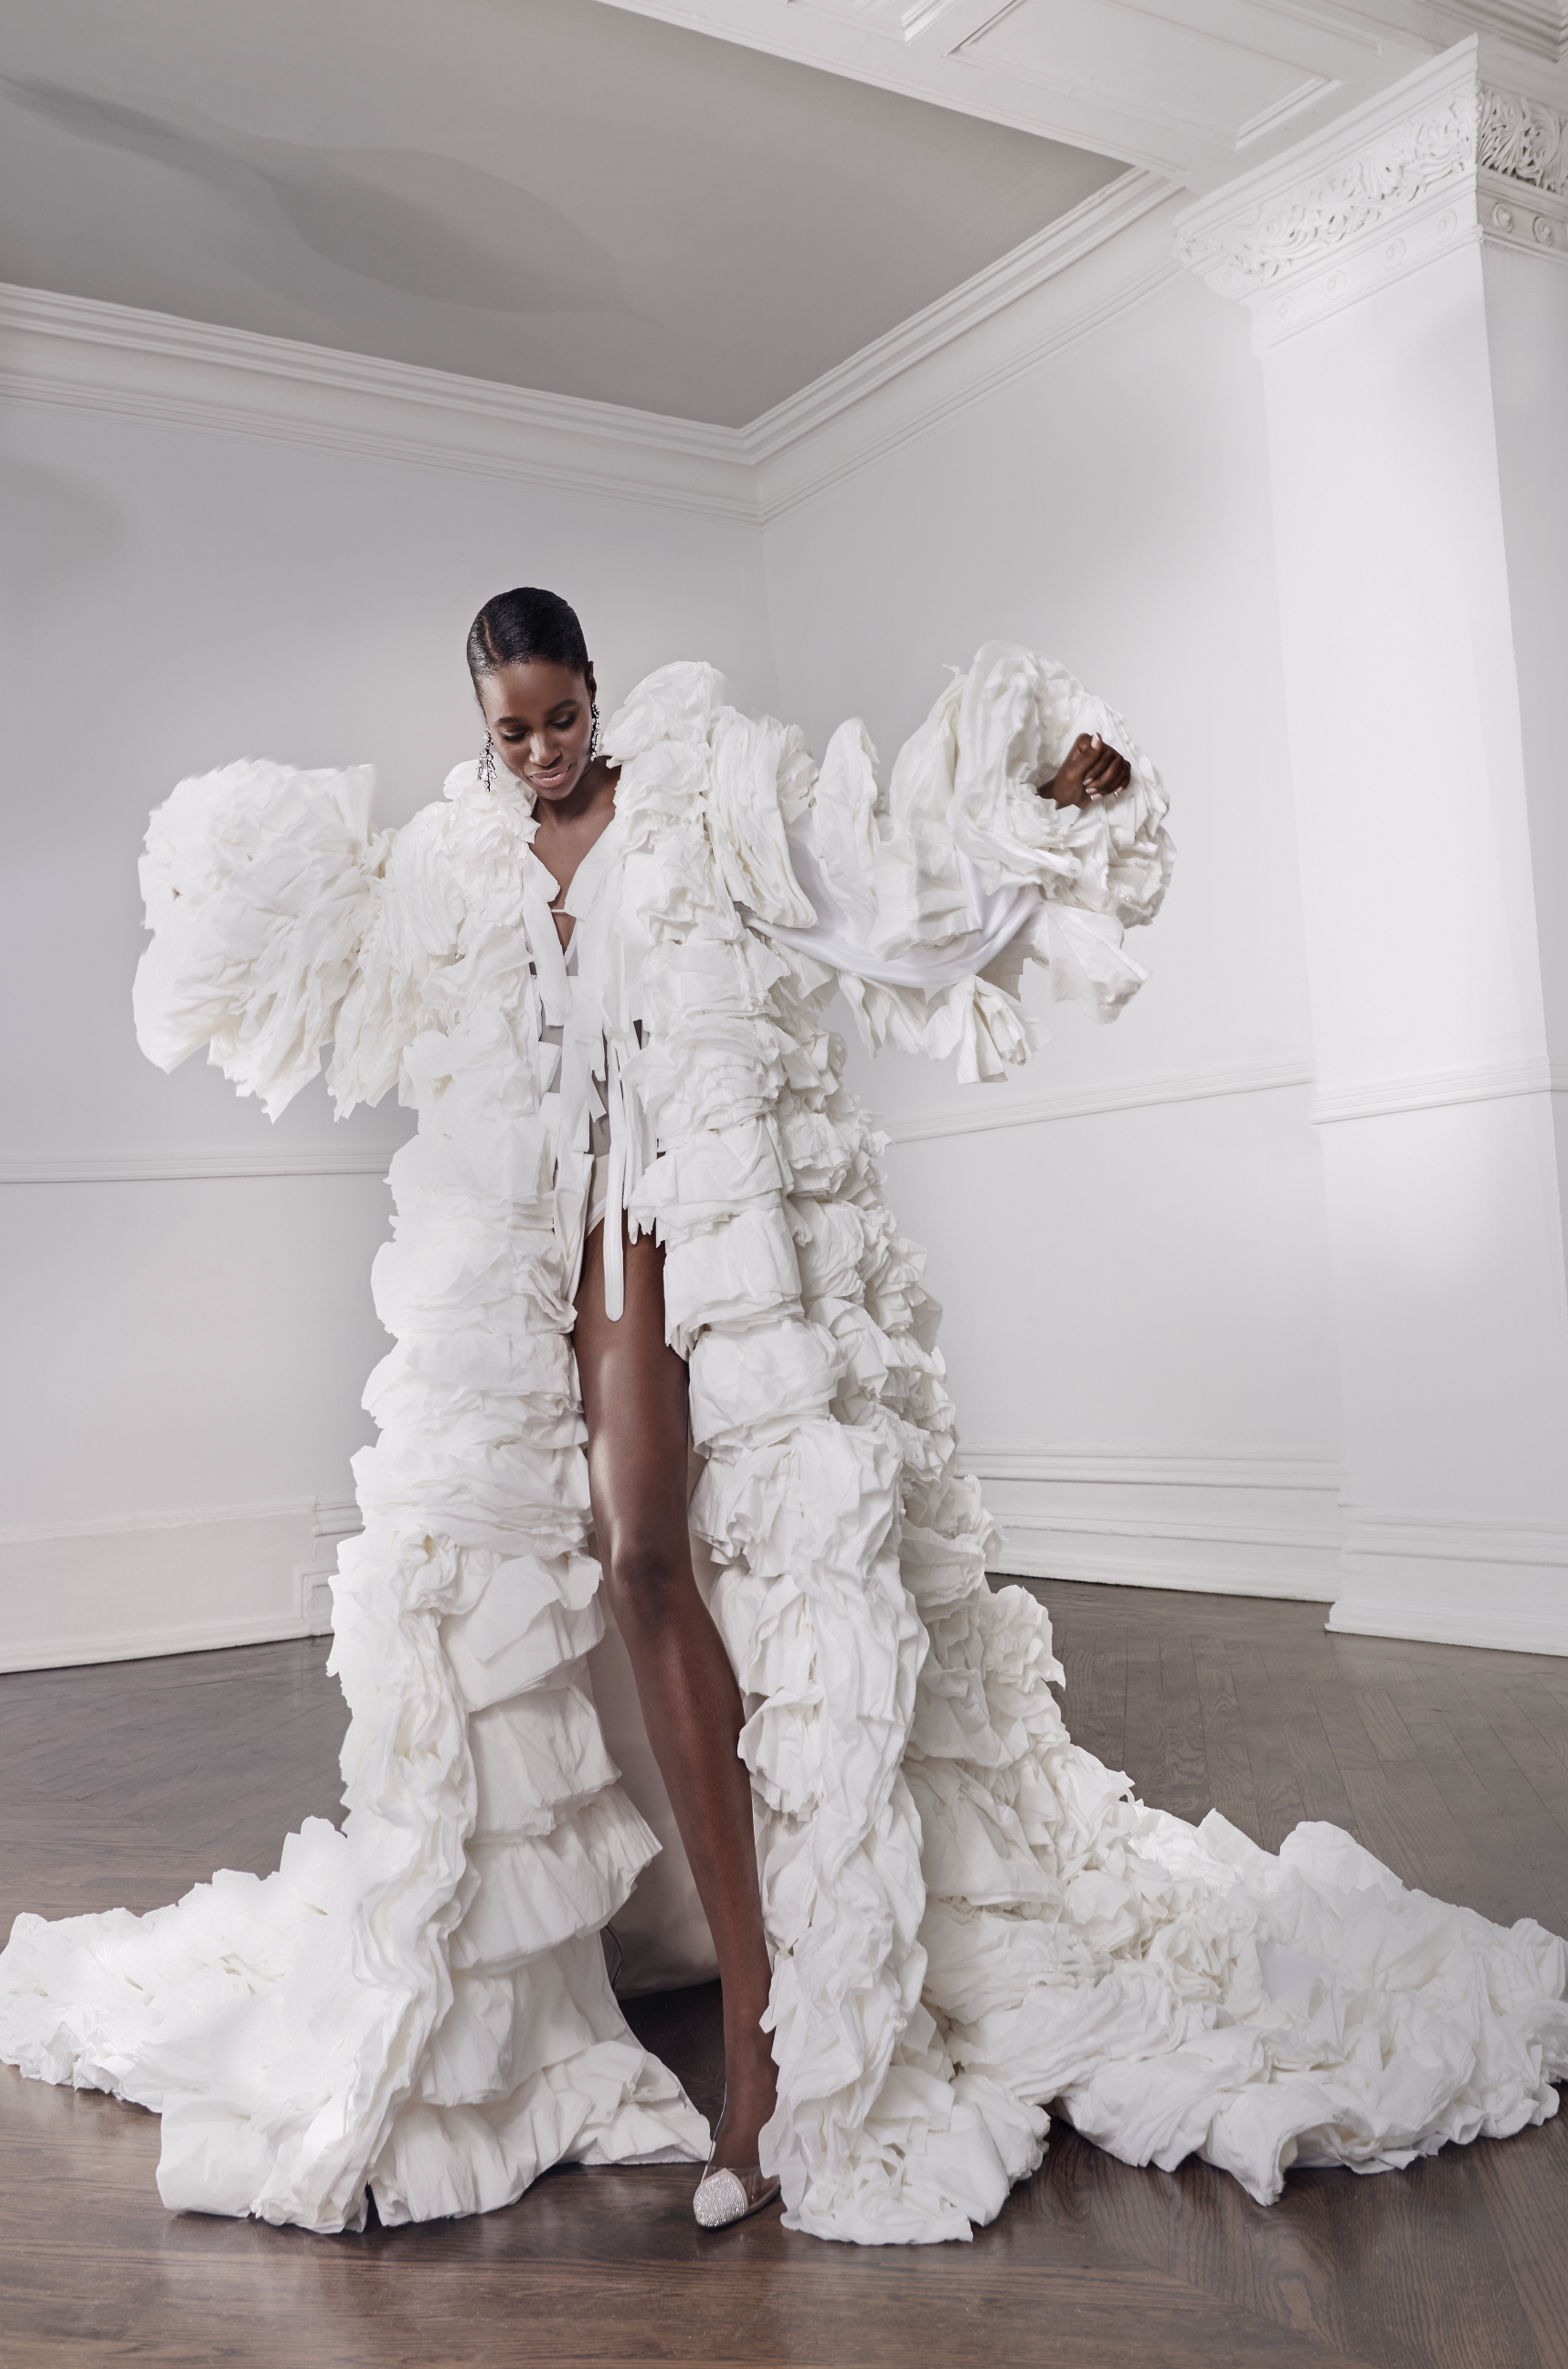 Paper Gown, Cashmere Canada, Editorial Commissioned Photography, Black model, Empty room, Campaign, Shot on Nikon